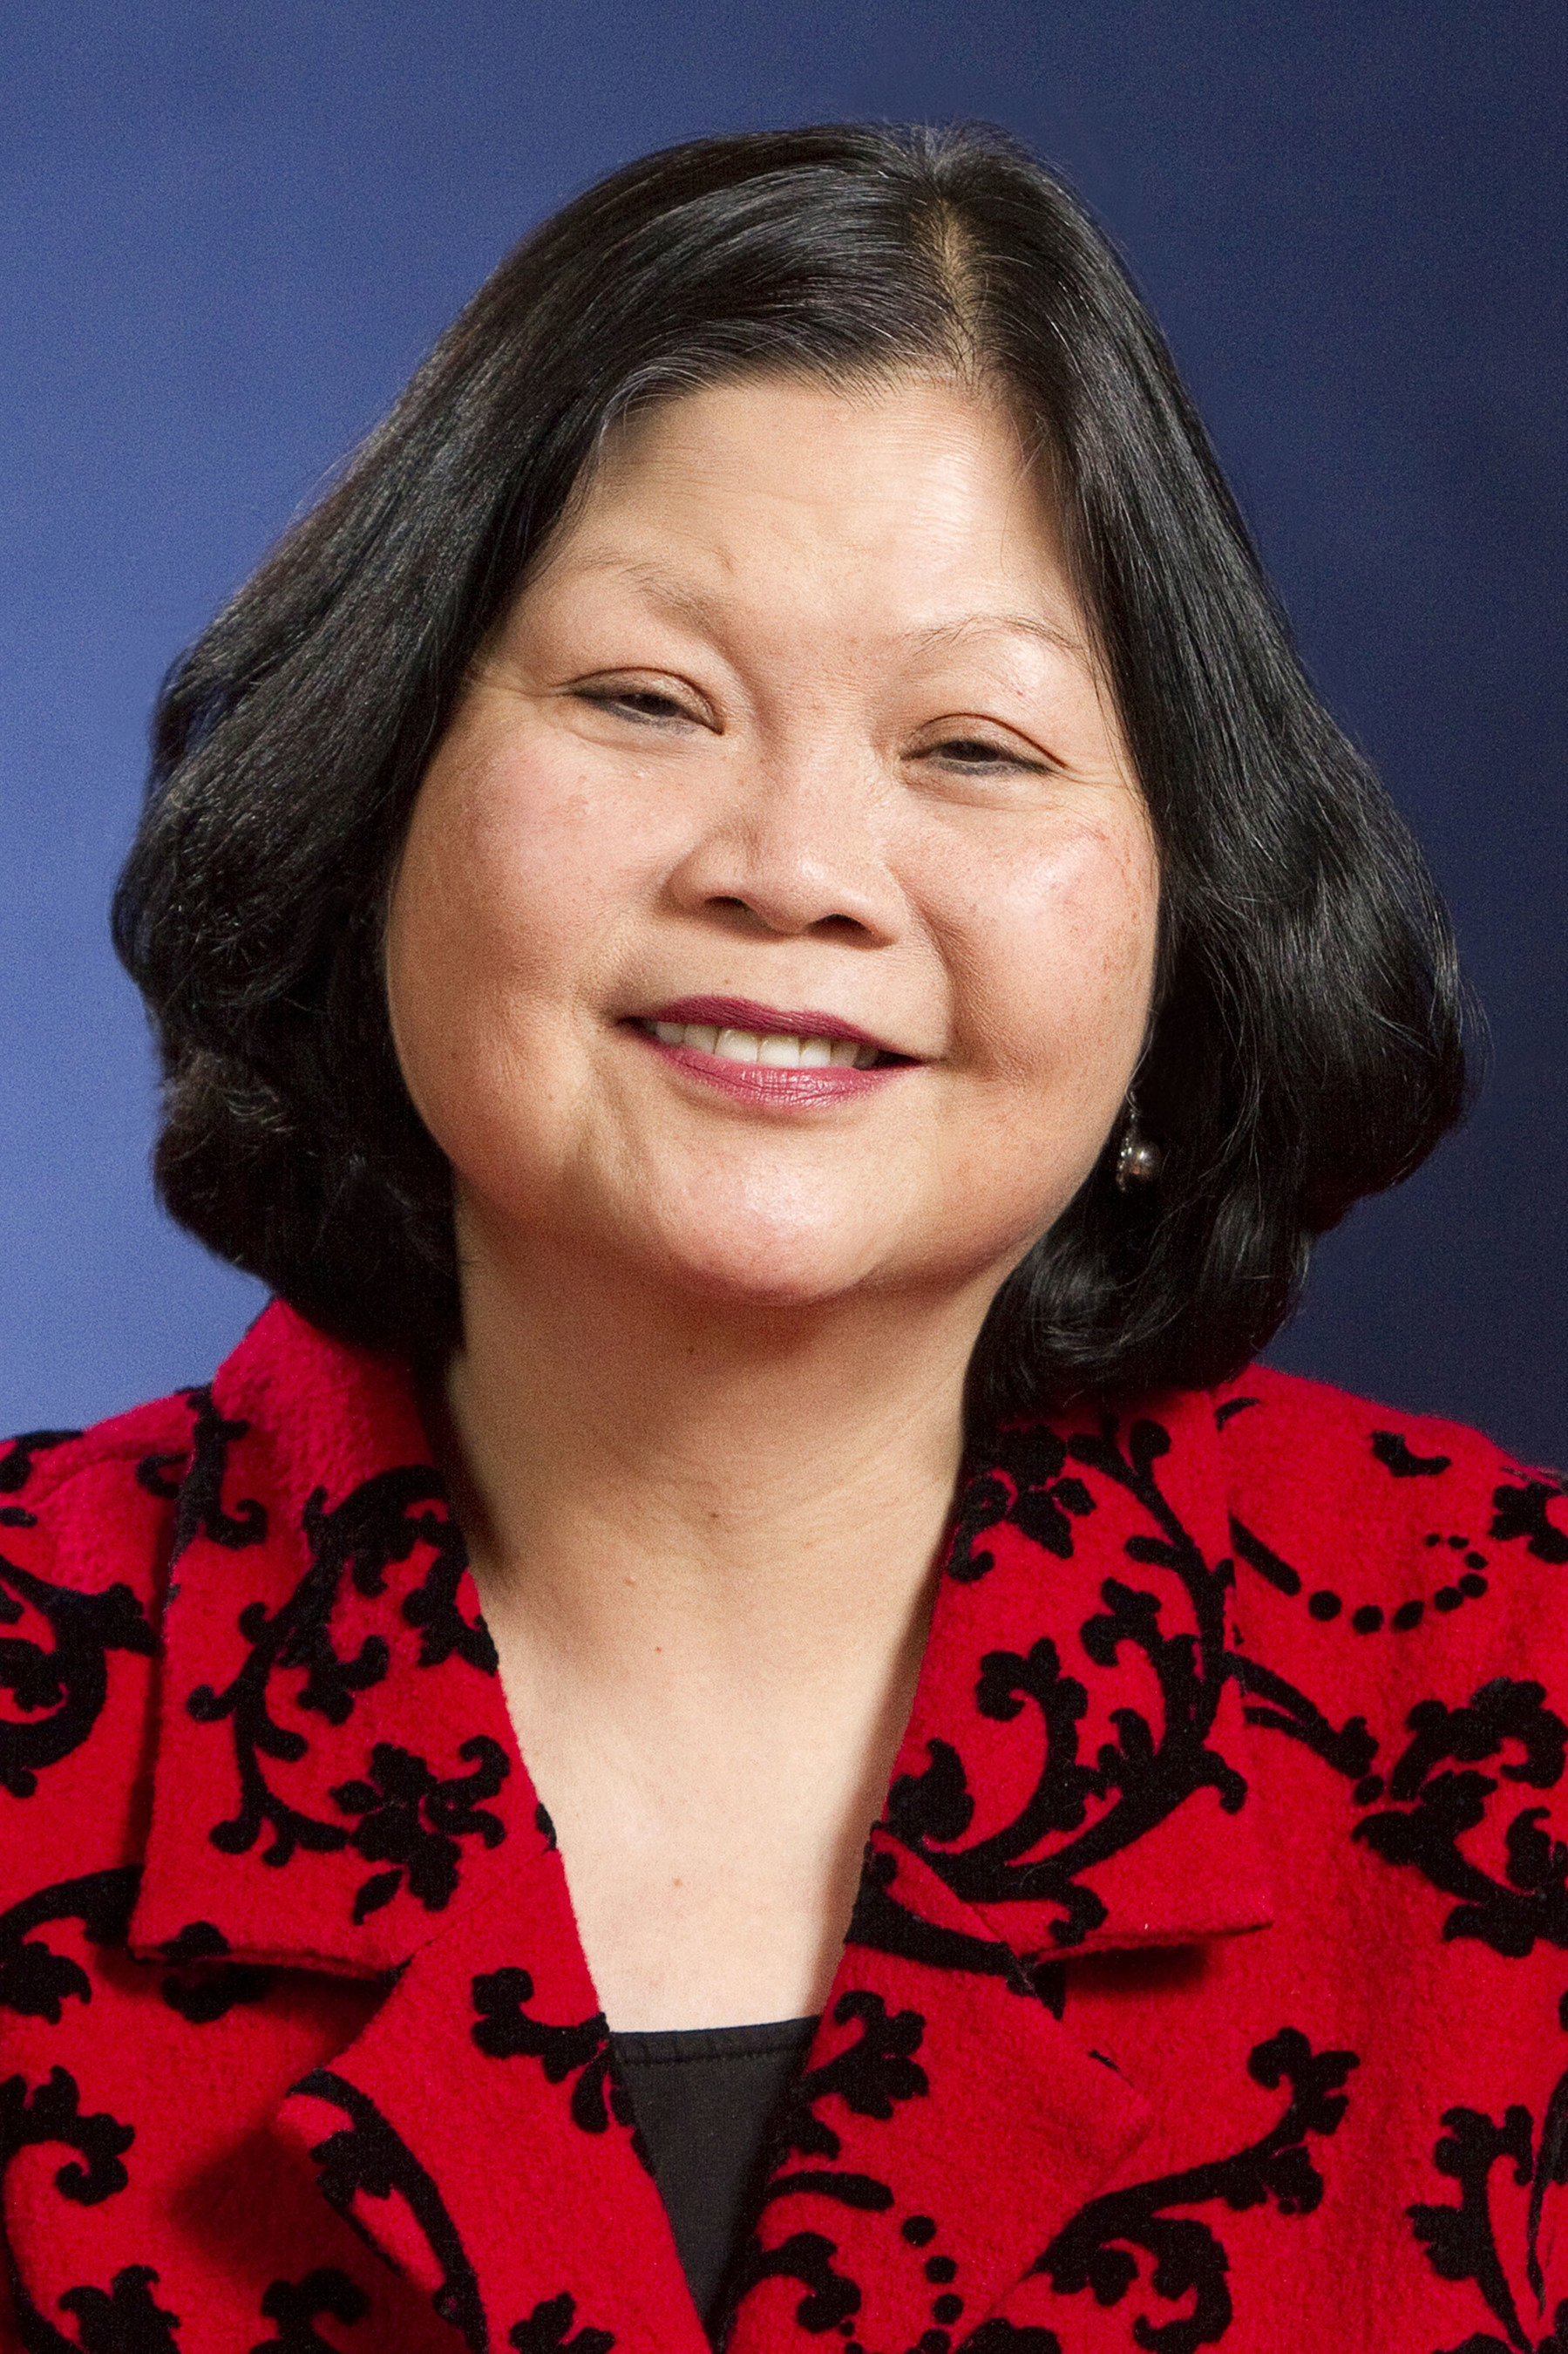 Catholic Relief Services (CRS) president Dr. Carolyn Y. Woo will be among those at the Vatican on Thursday speaking at the release of Pope Francis' encyclical on the environment, "Laudato Si; on the care of our common home."